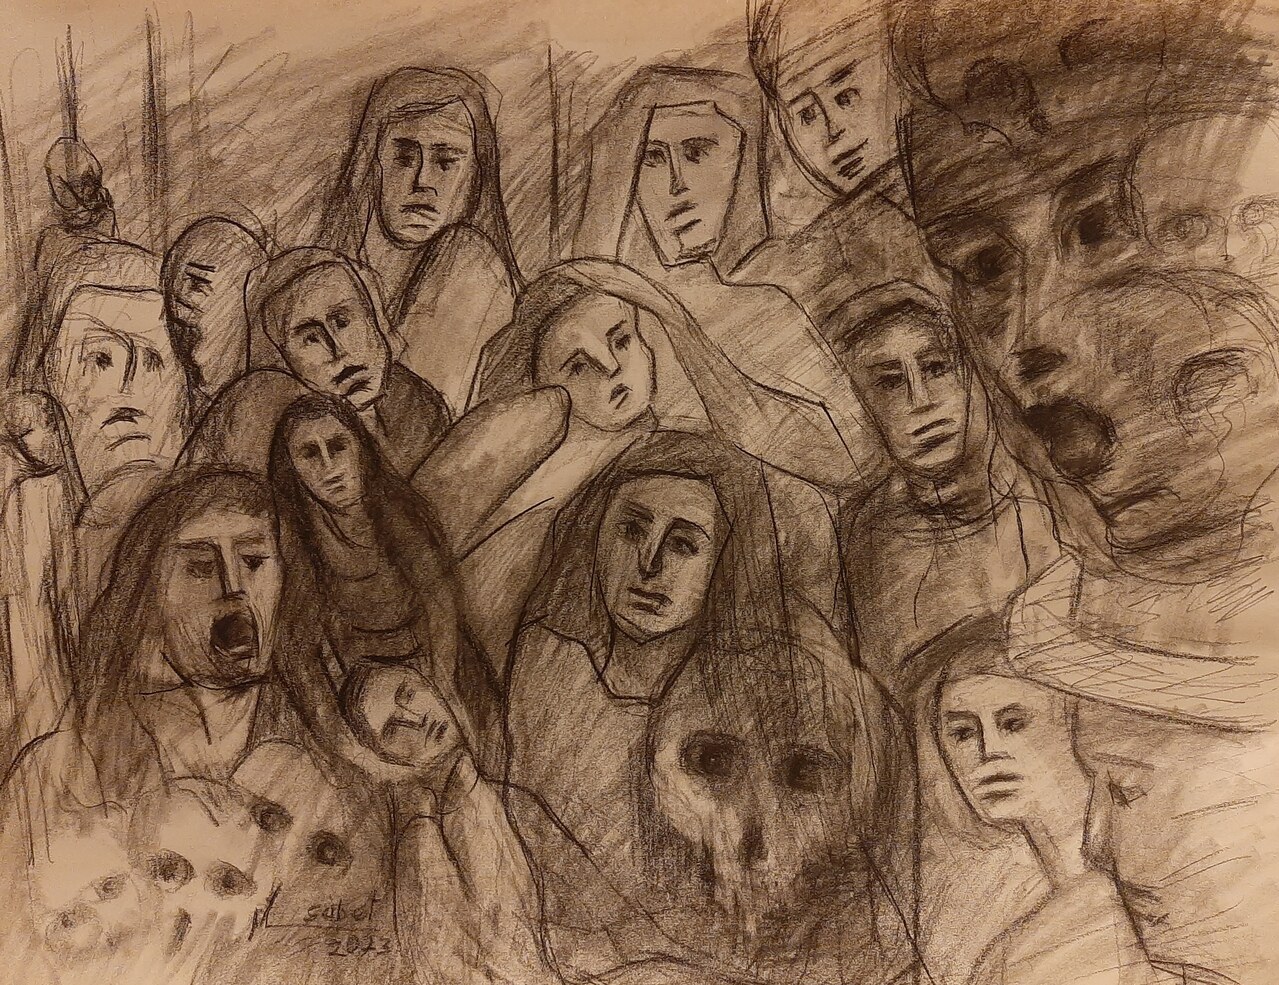 Terrorism - Charcoal
SOLD